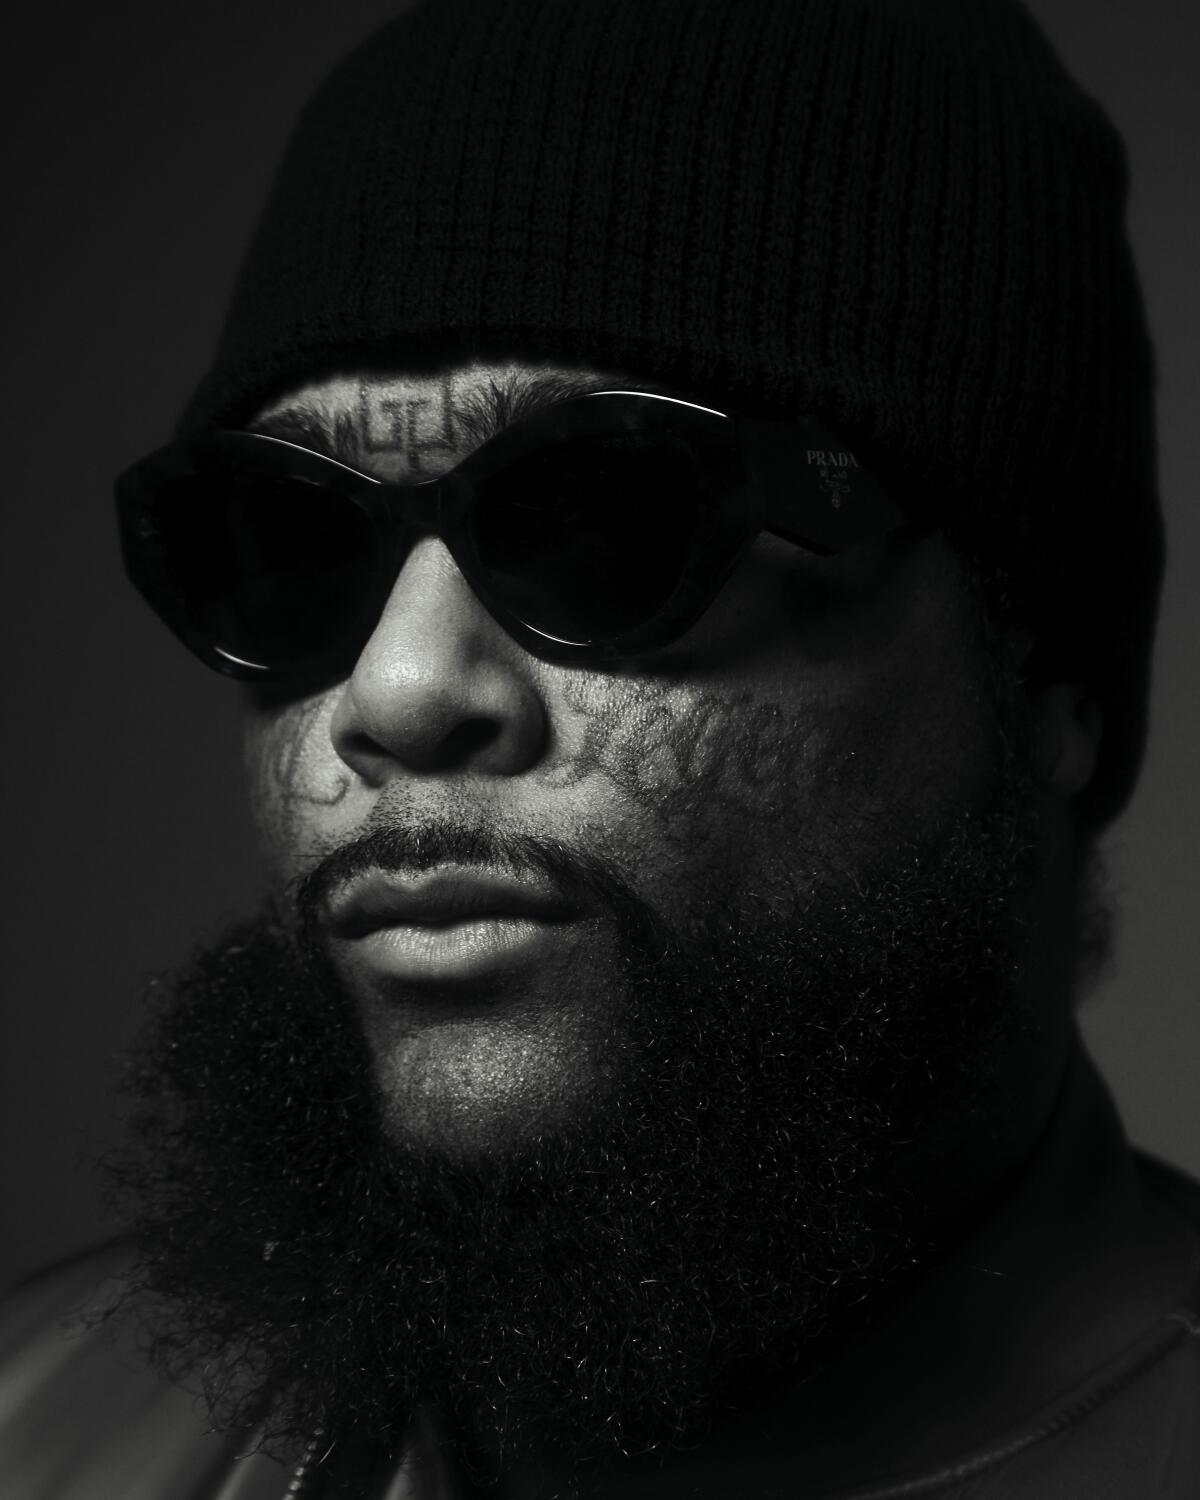 black and white photo of a man with face tattoos wearing sunglasses and a black beanie